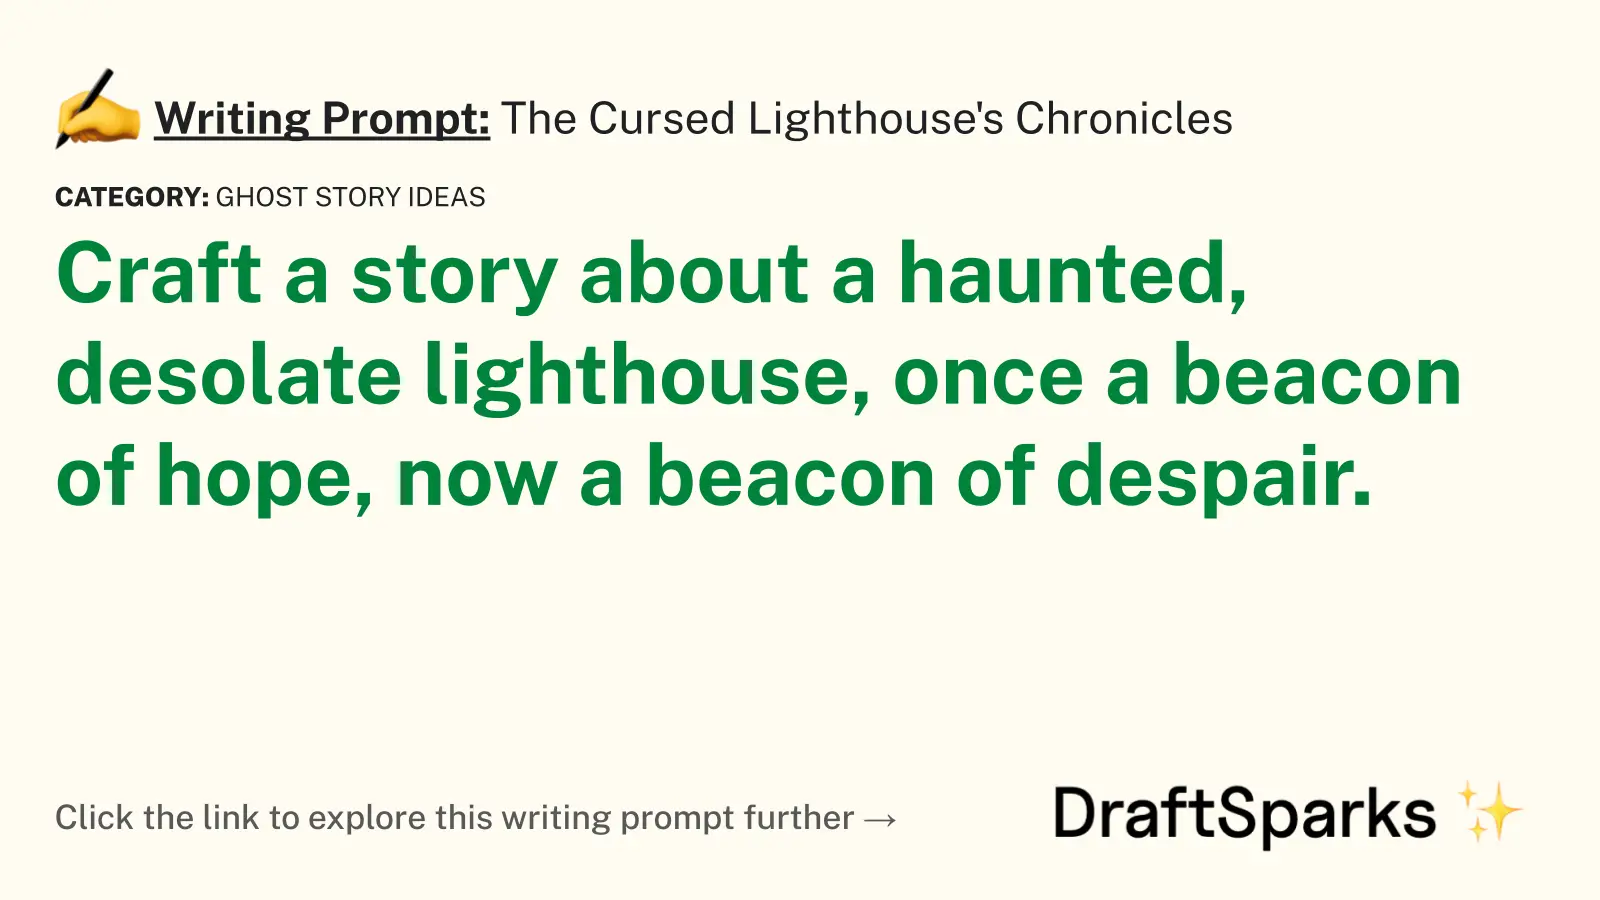 The Cursed Lighthouse’s Chronicles